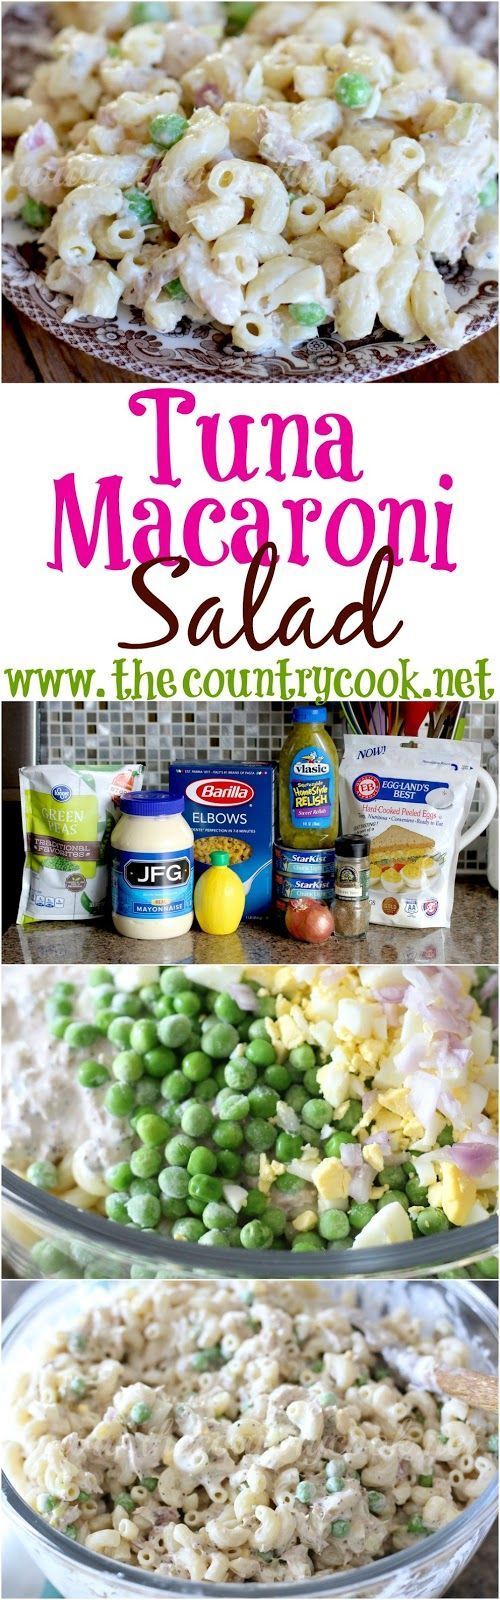 Tuna Macaroni Salad recipe from The Country Cook. Delicious flavors with lots of filling protein! Everyone loves this! A great way